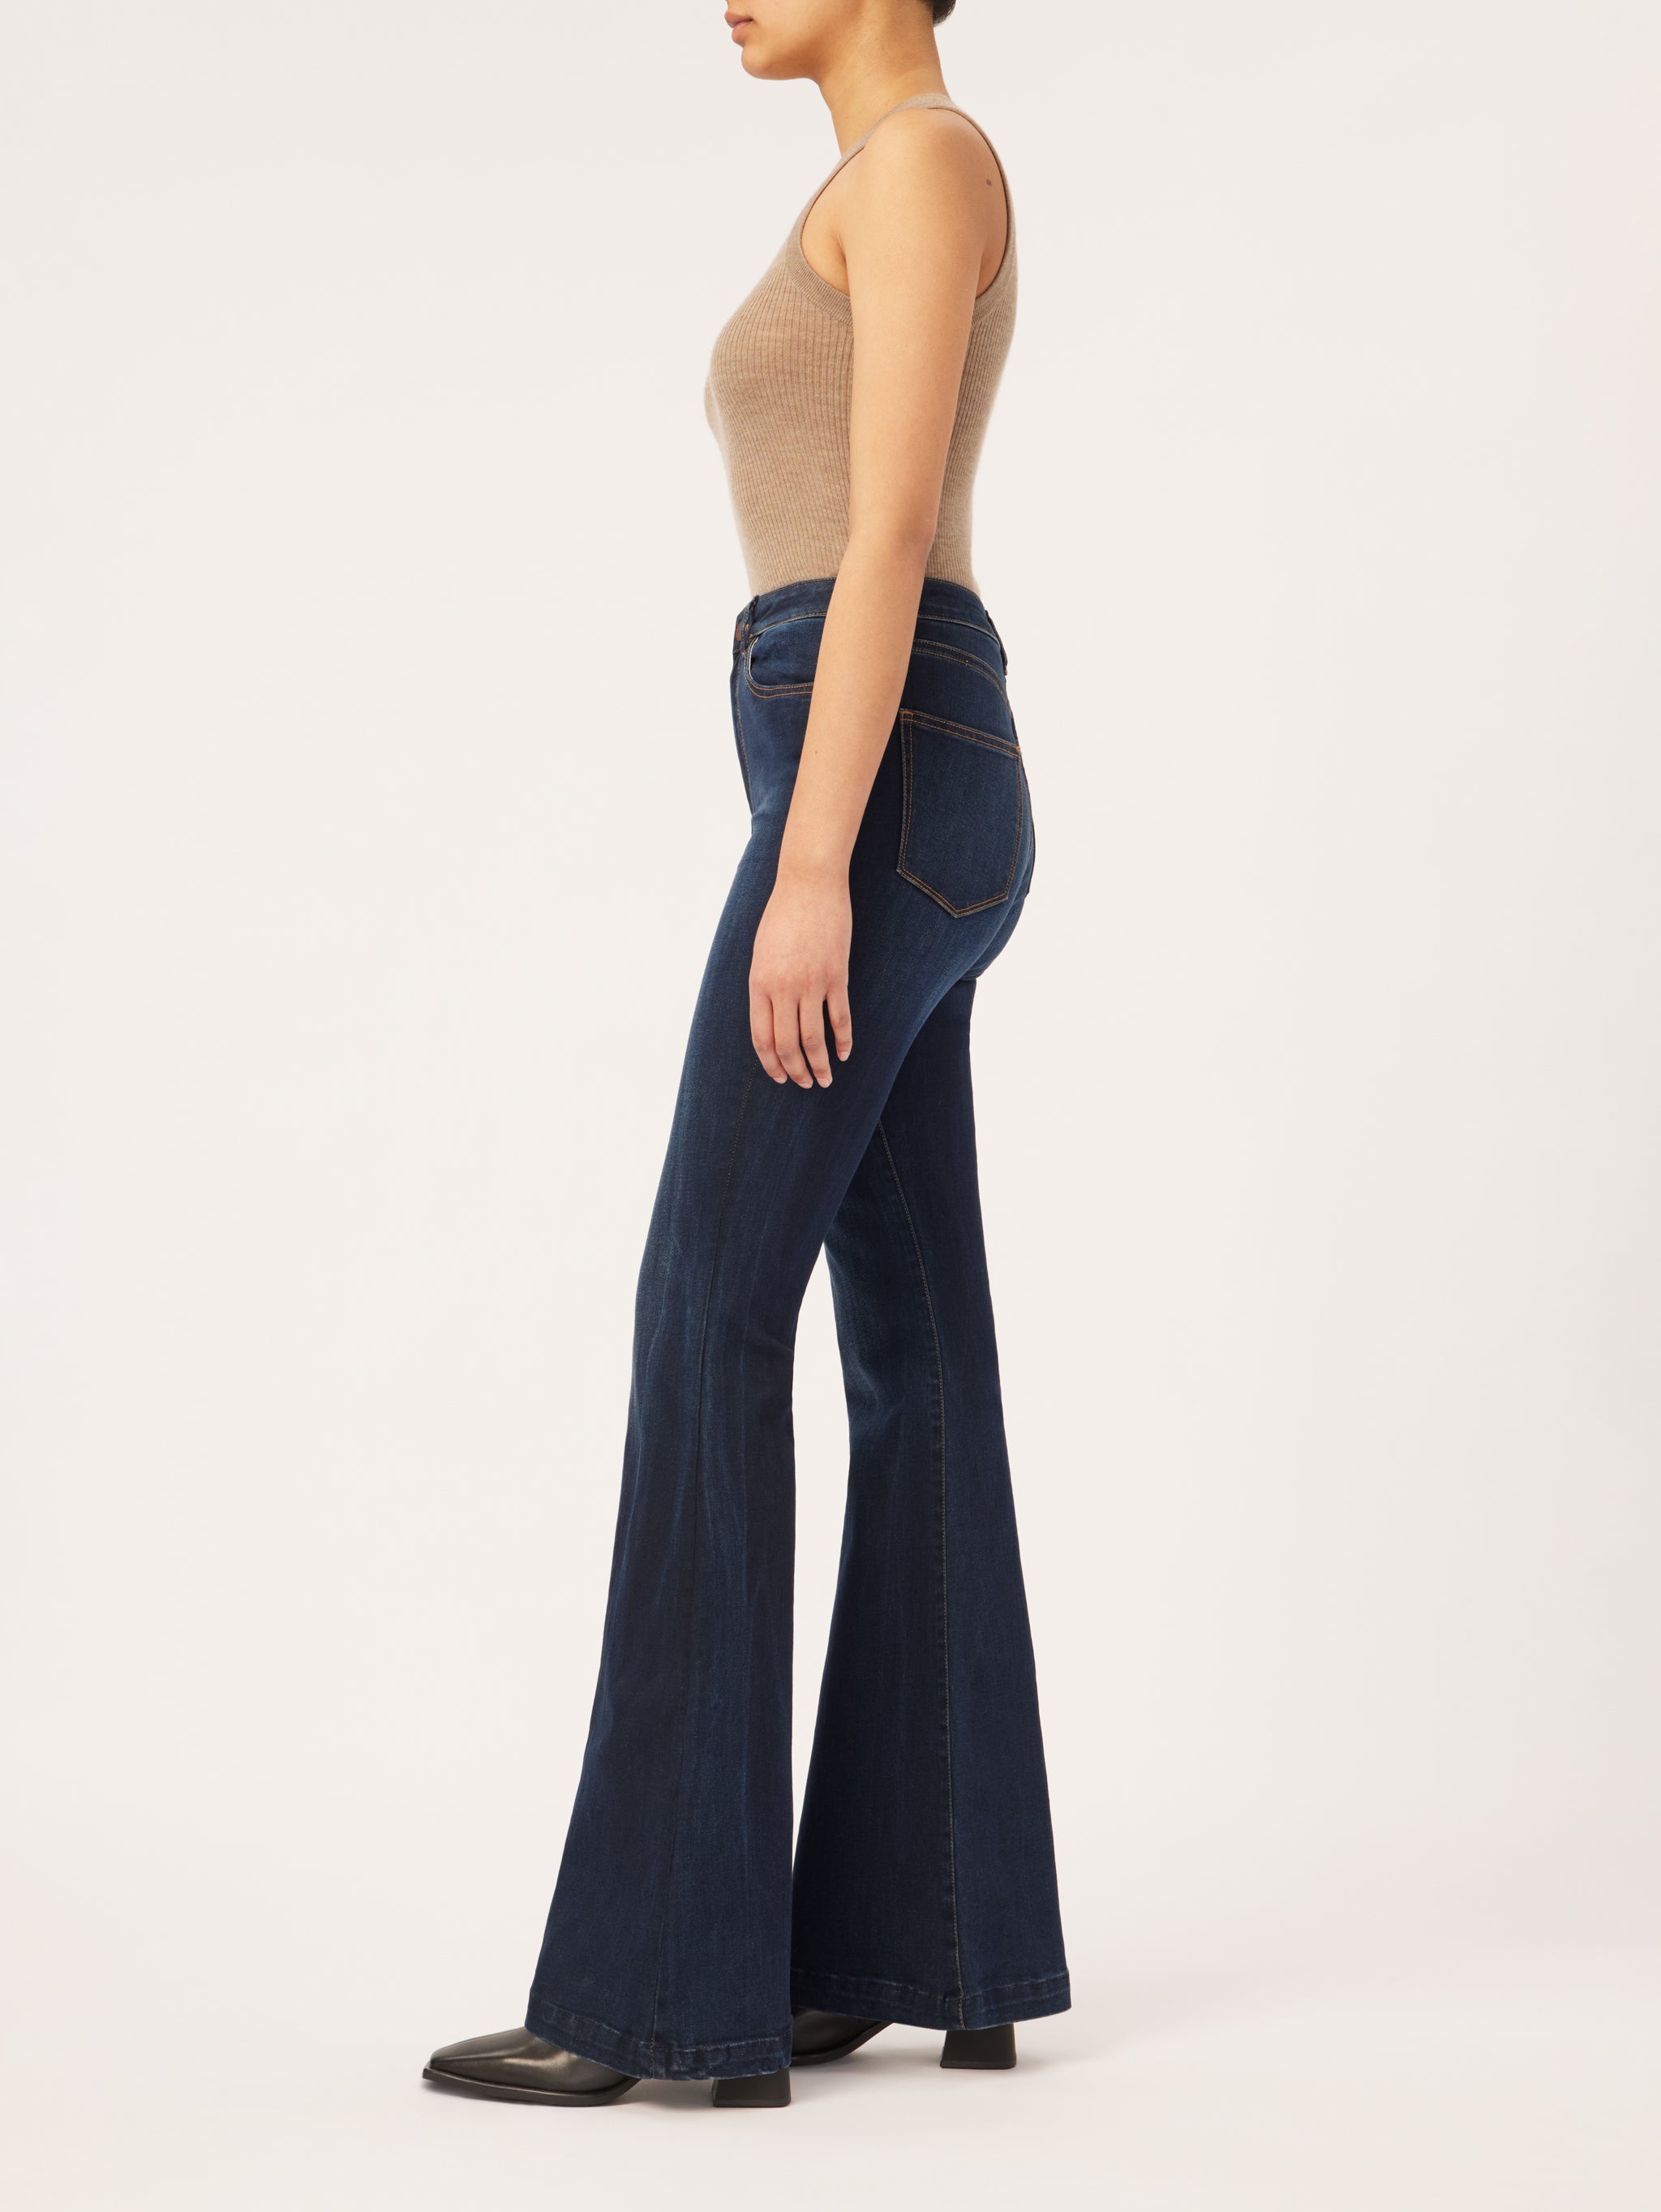 Ultra High Rise Flare Bootcut Jeans